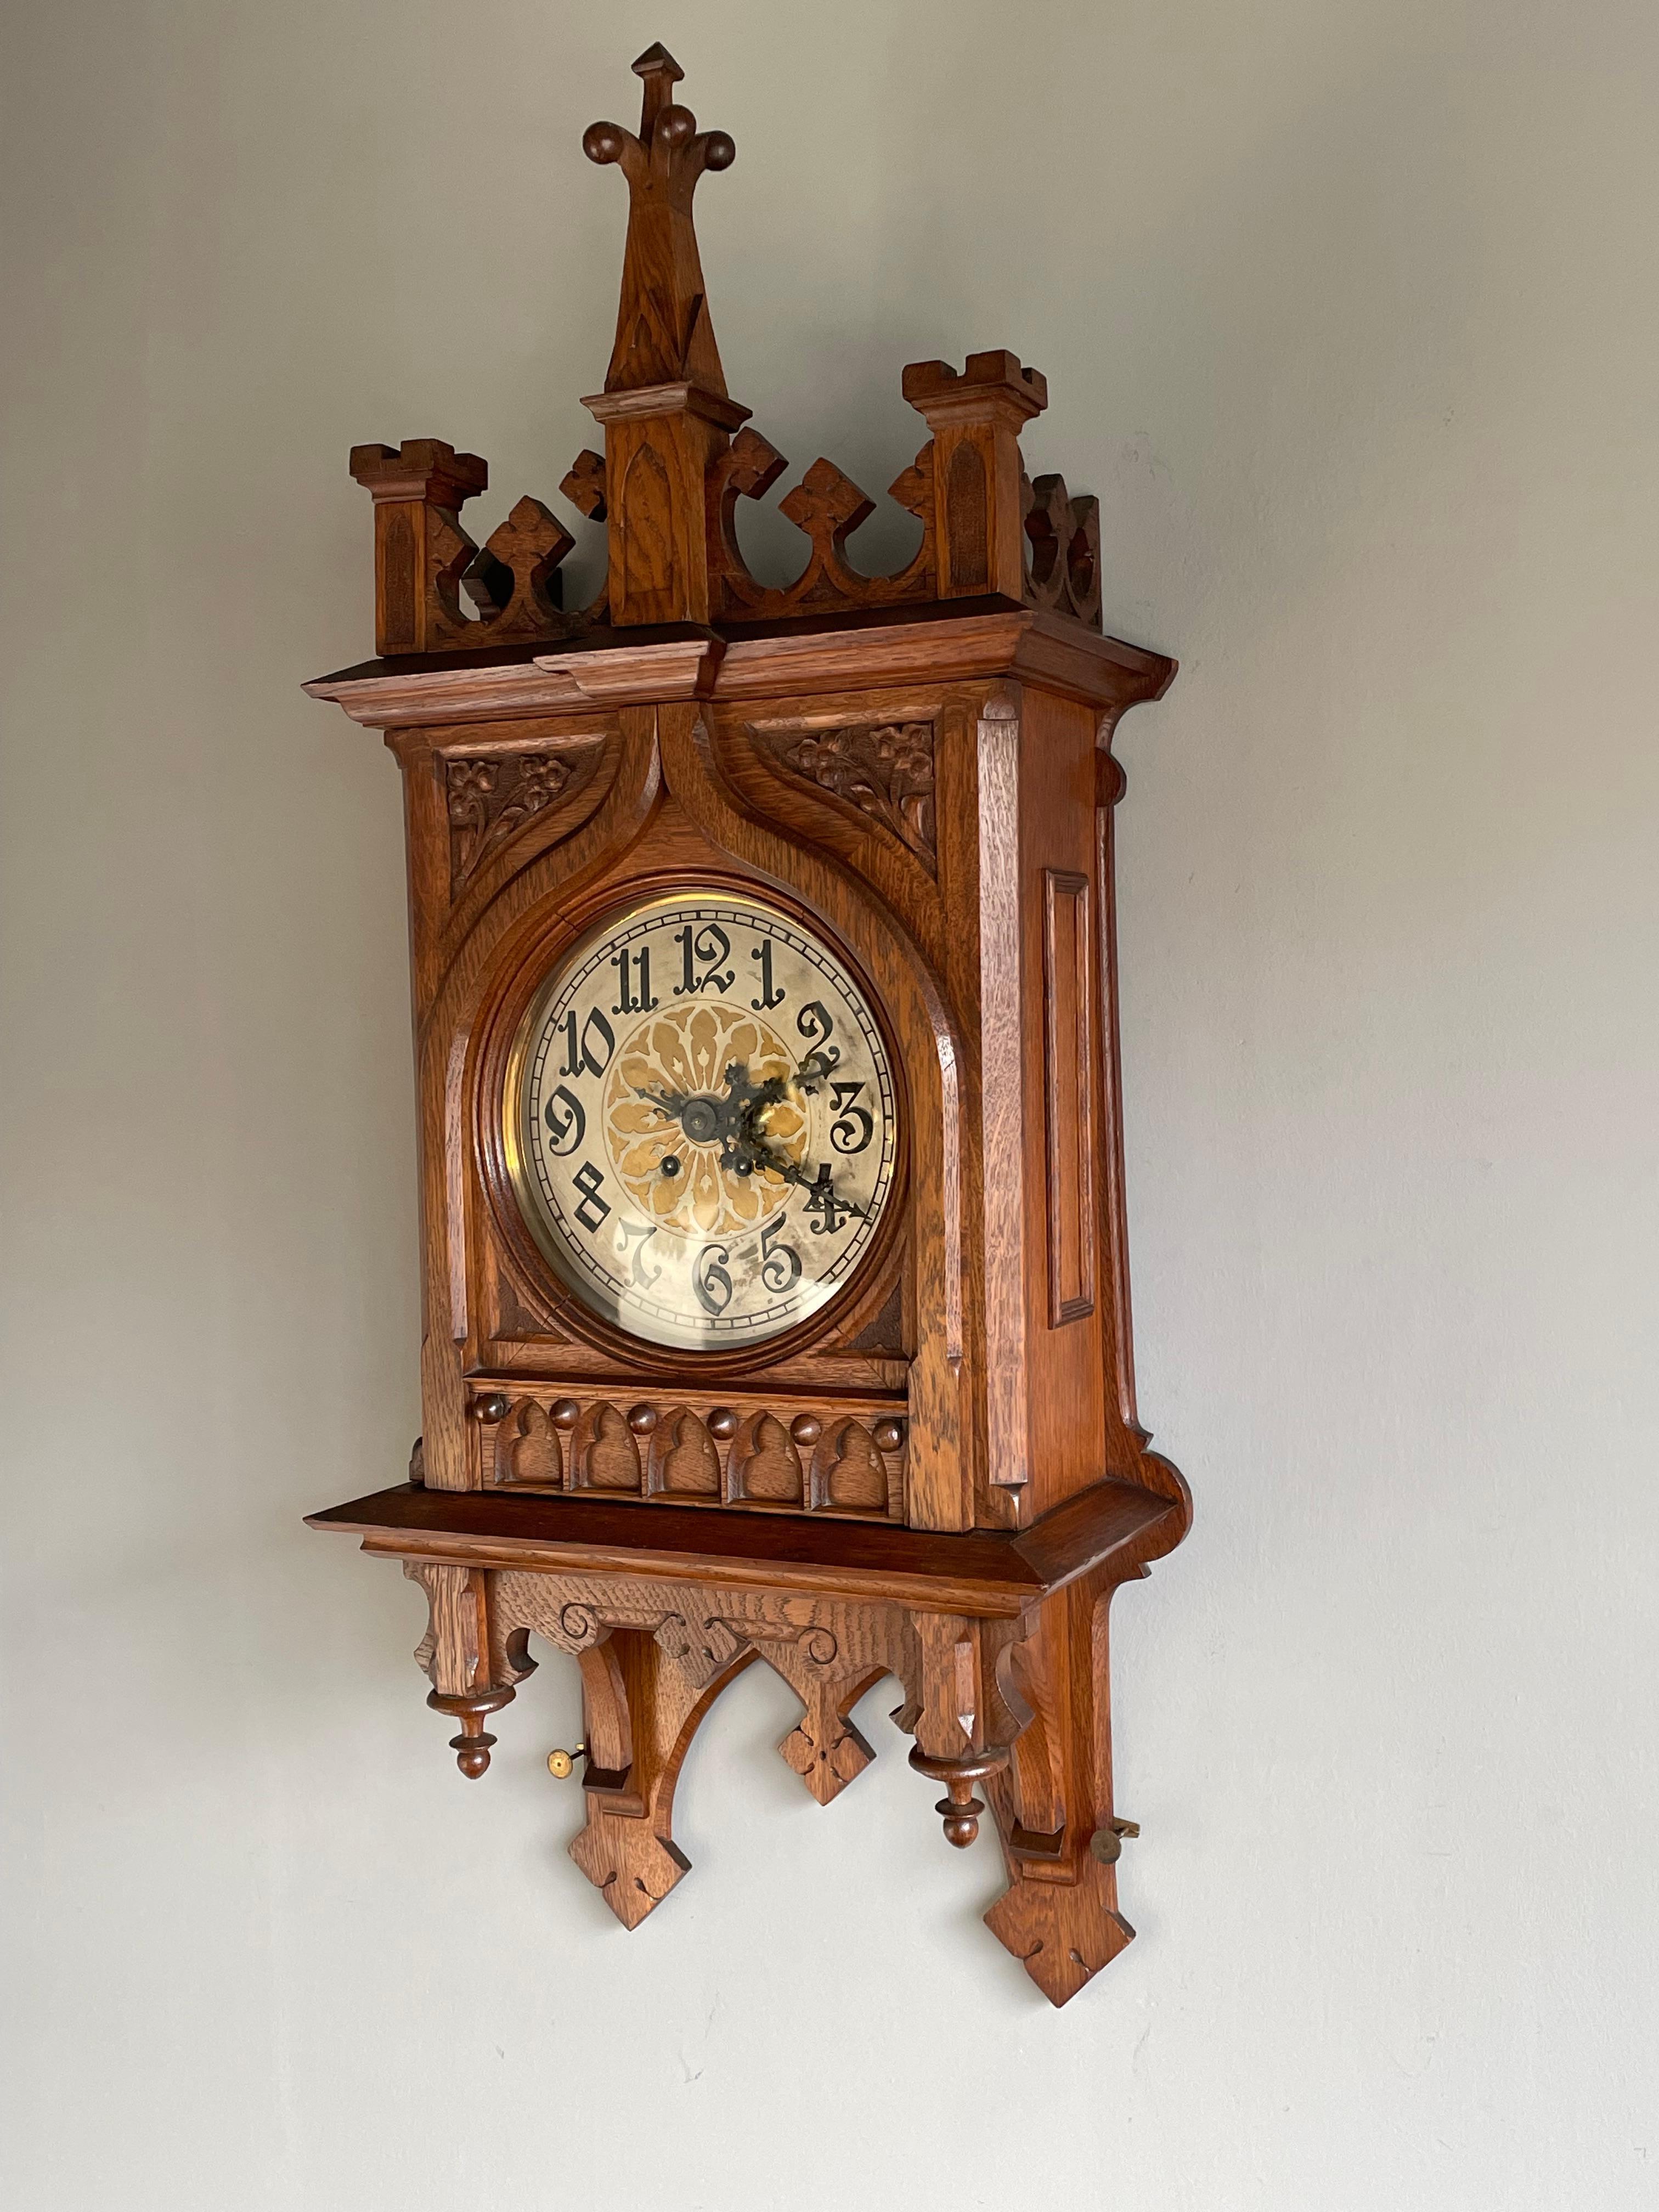 Large and impressive clock with an abundance of Gothic details.

Gothic wall clocks make great decorative antiques and this turn of the century specimen, in our view, has the perfect size and design to use and enjoy in any Gothic (inspired)